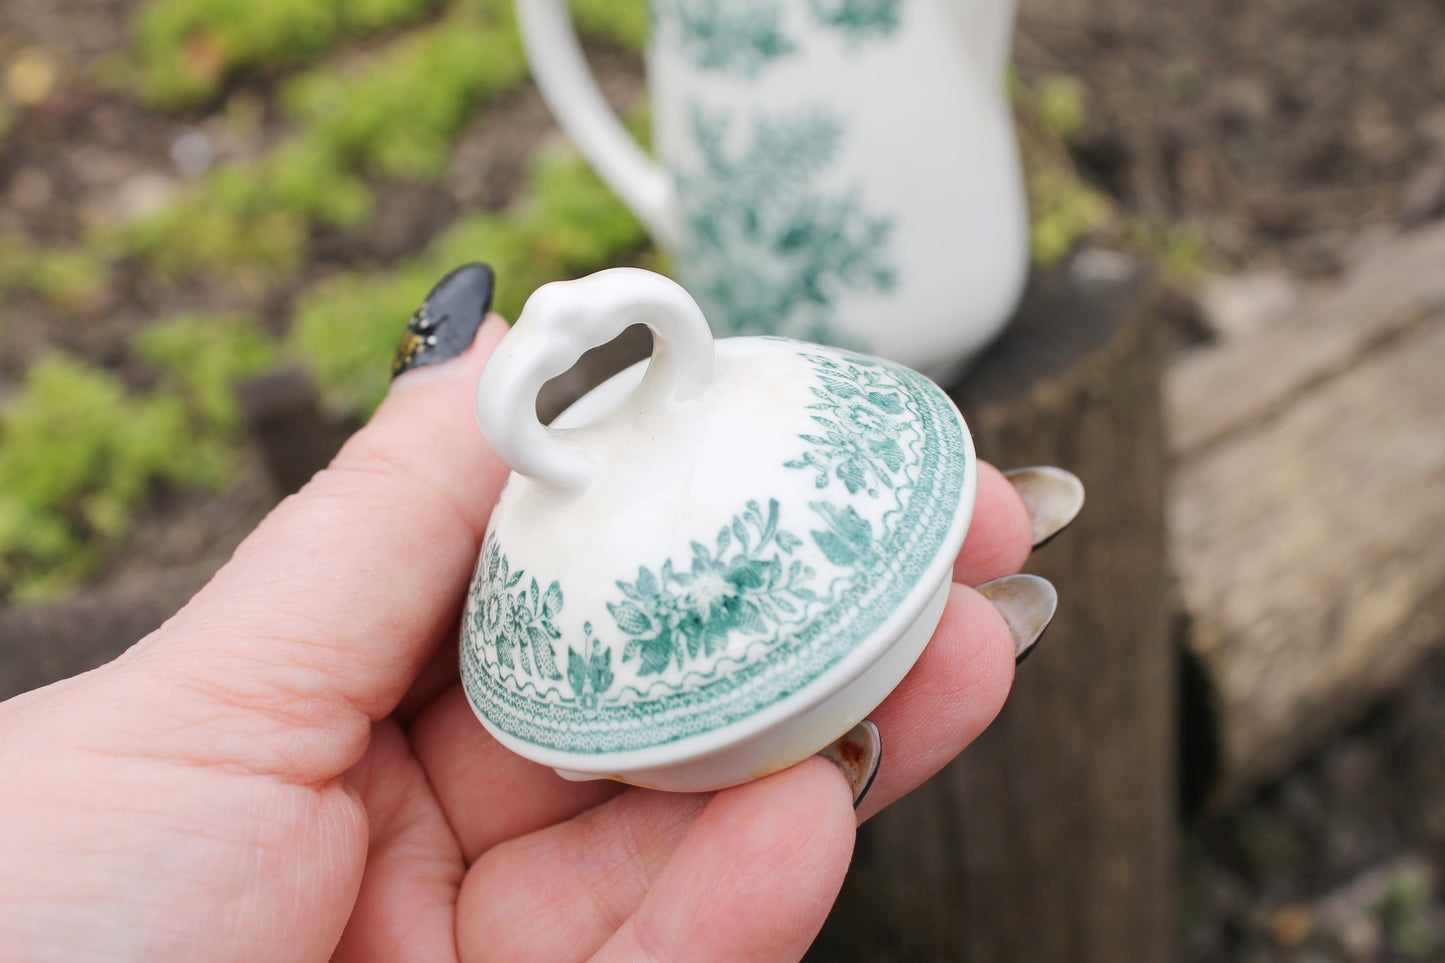 Beautiful vintage small Tea Pot - 5.1 inches - vintage Germany ceramic - Villeroy & Boch Fasan teapot -1980s